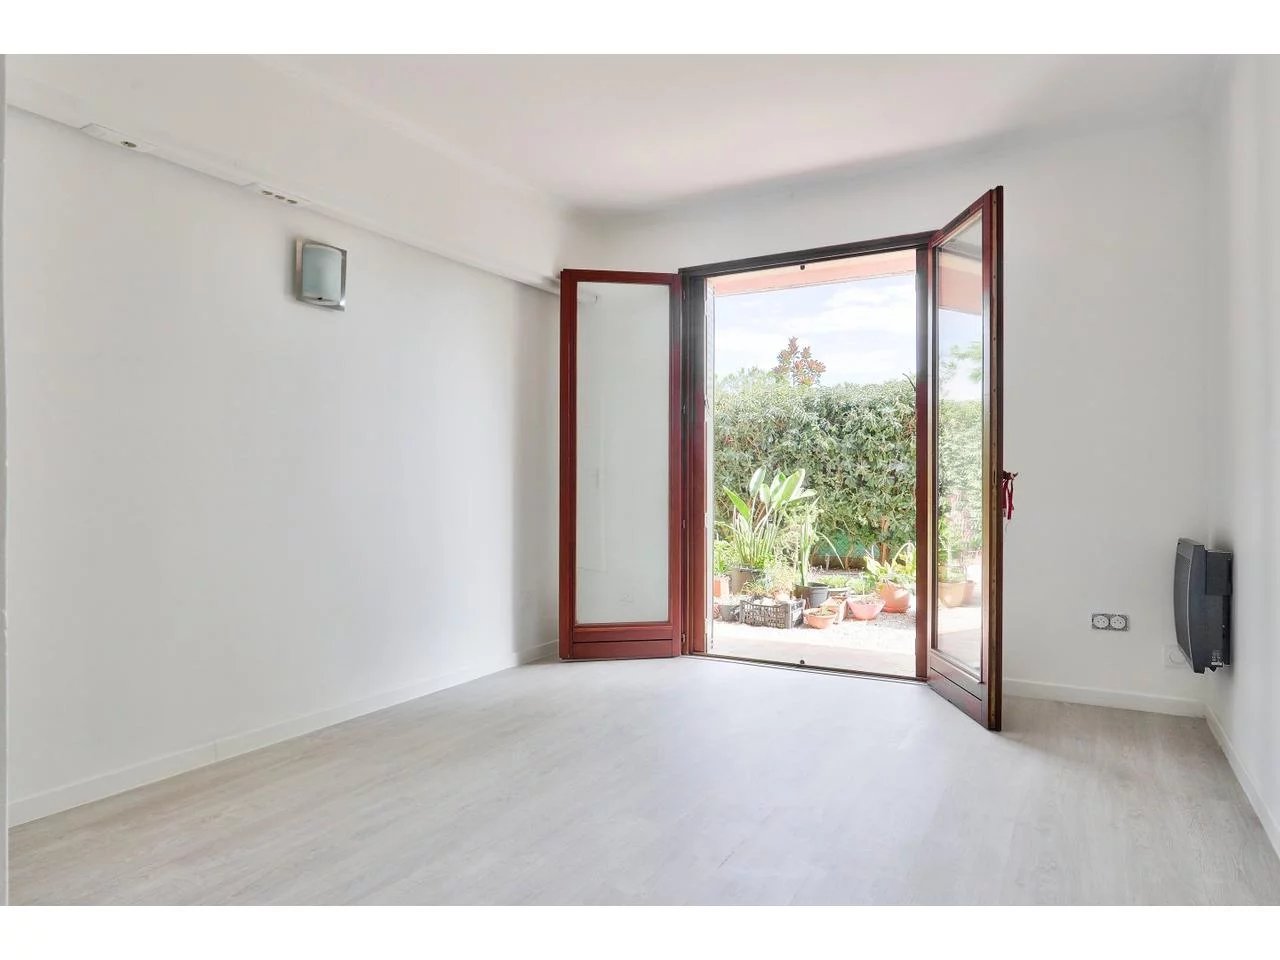 Appartement  4 Rooms 90.64m2  for sale   435 000 €